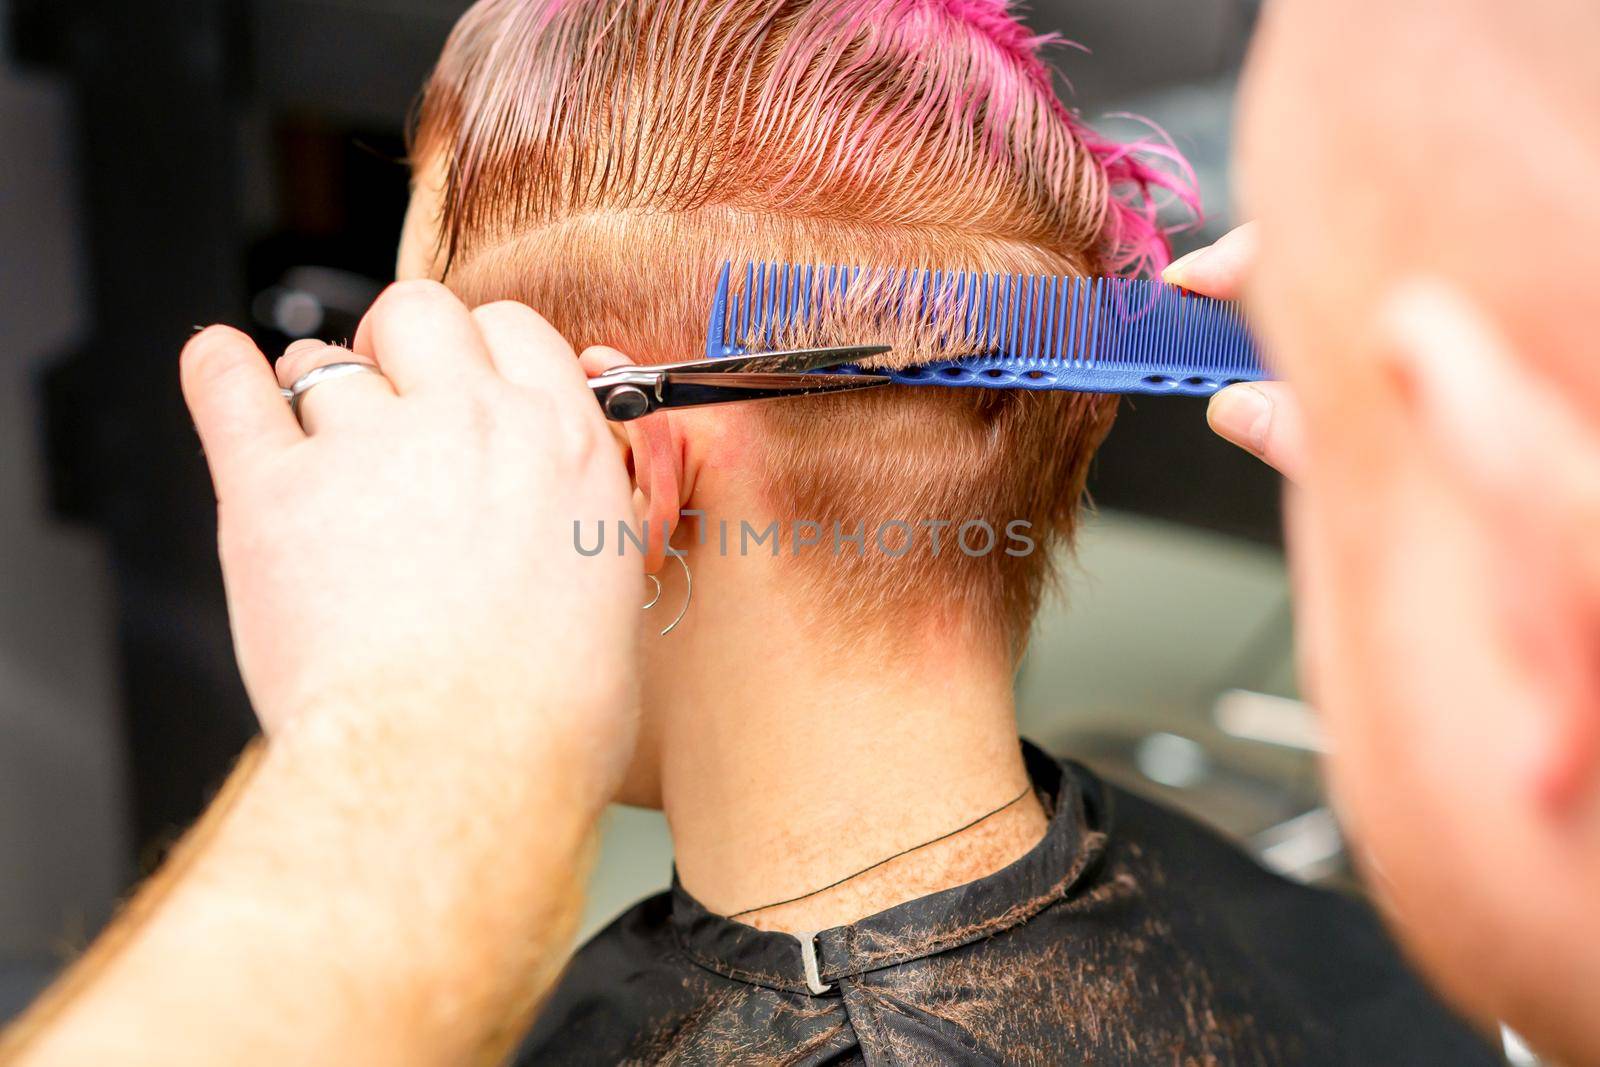 Haircut of dyed short pink wet hair of young caucasian woman by a male hairdresser in a barbershop